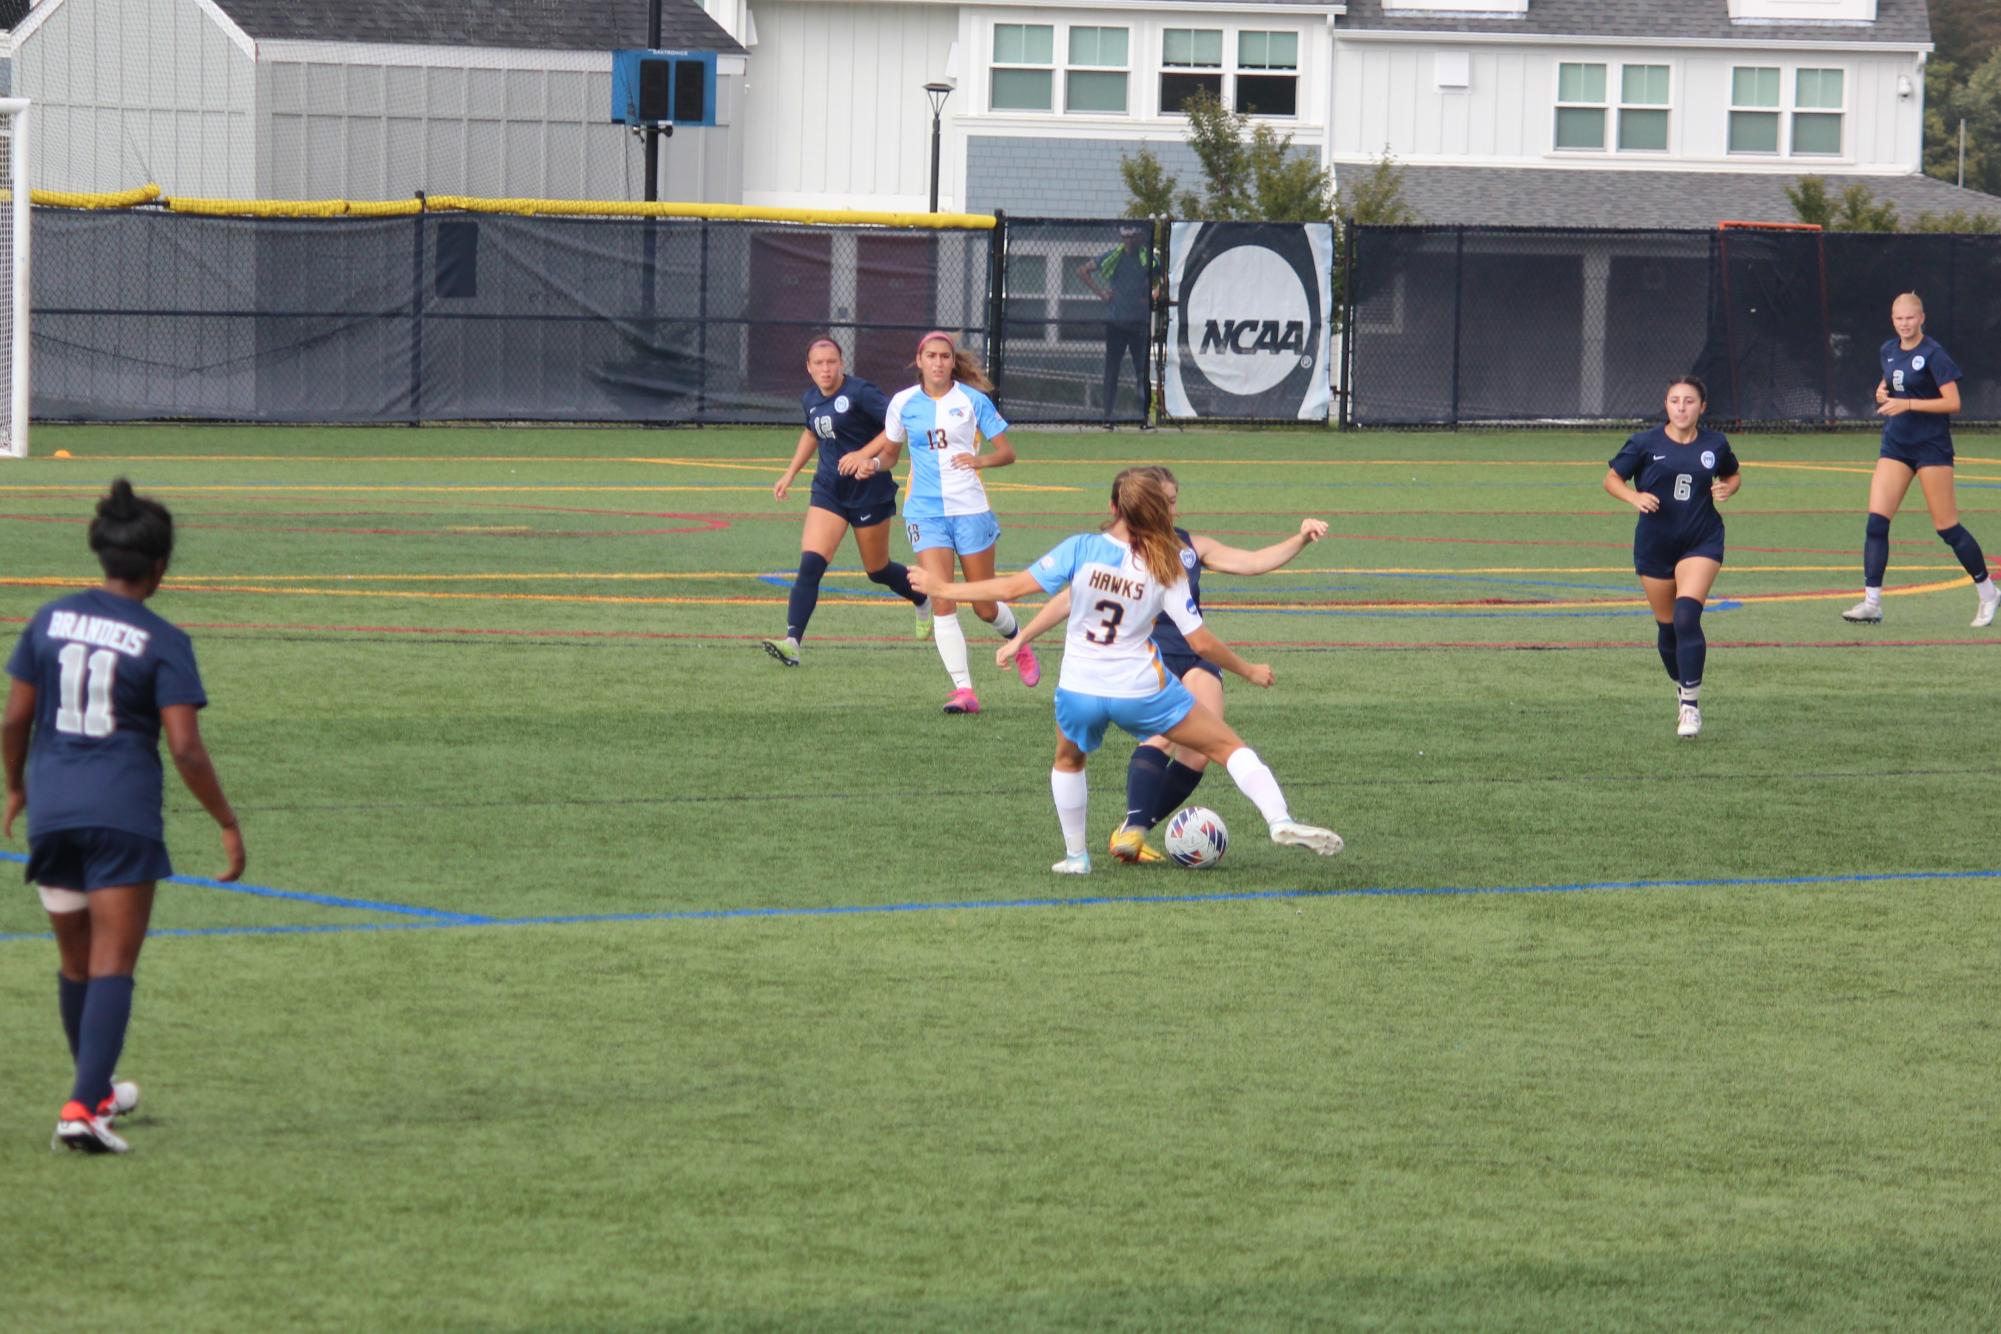 Midfielder, Sophomore Sarah Newman, challenges a Brandeis University player for the ball. RWU Women’s Soccer team’s current record is 1-4-2.